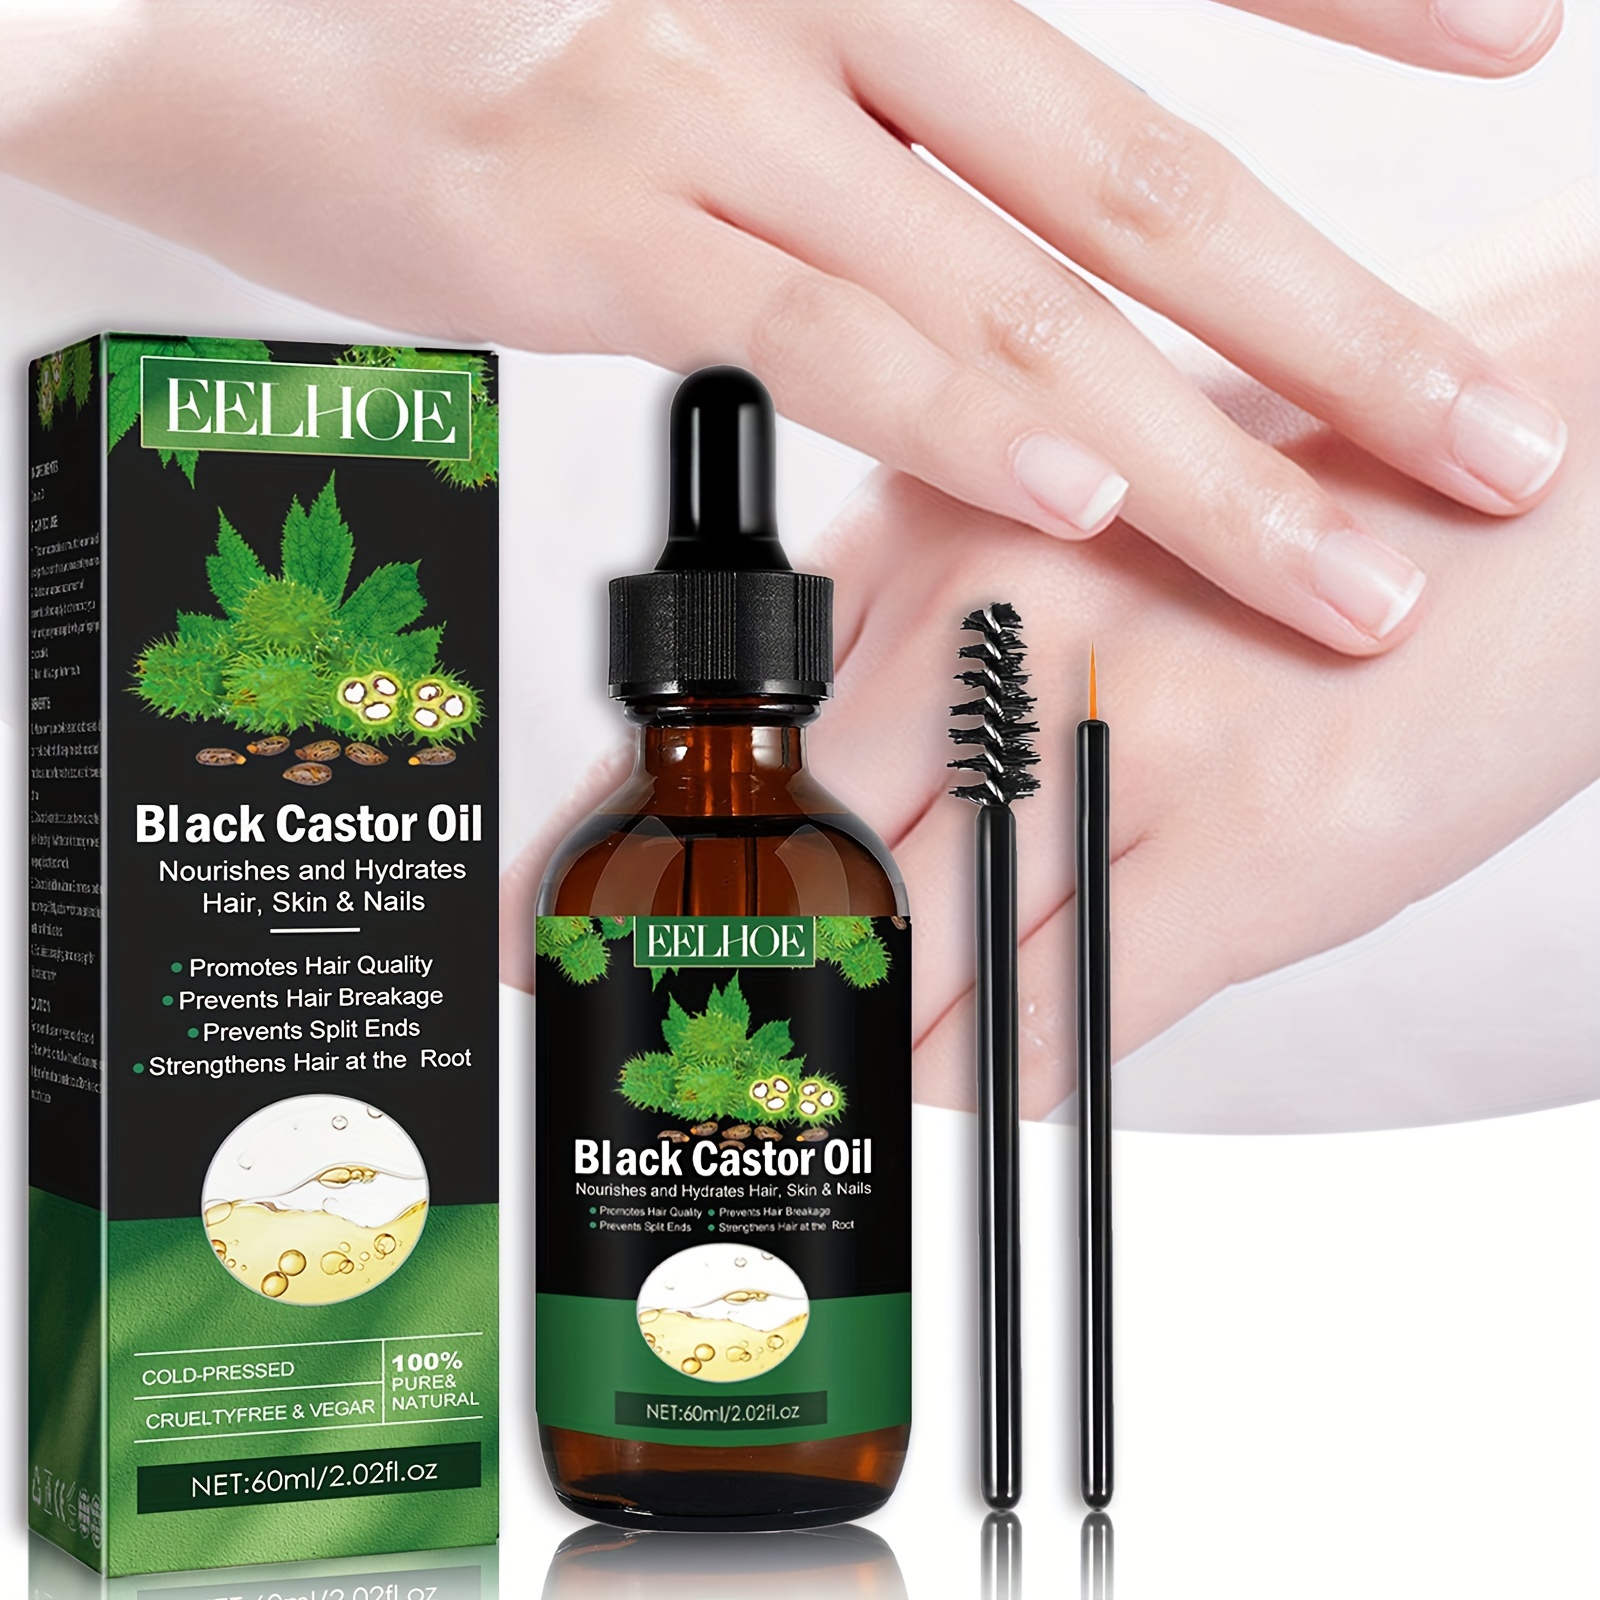 Amazon.com: Black Castor Oil Jamaican. 100% Pure Natural Virgin Unrefined  Cold Pressed Carrier Oil. 1 Fl.oz.- 30 Ml. For Skin, Hair, Eyelashes, Brows  and Nail Care by Botanical Beauty : Beauty &